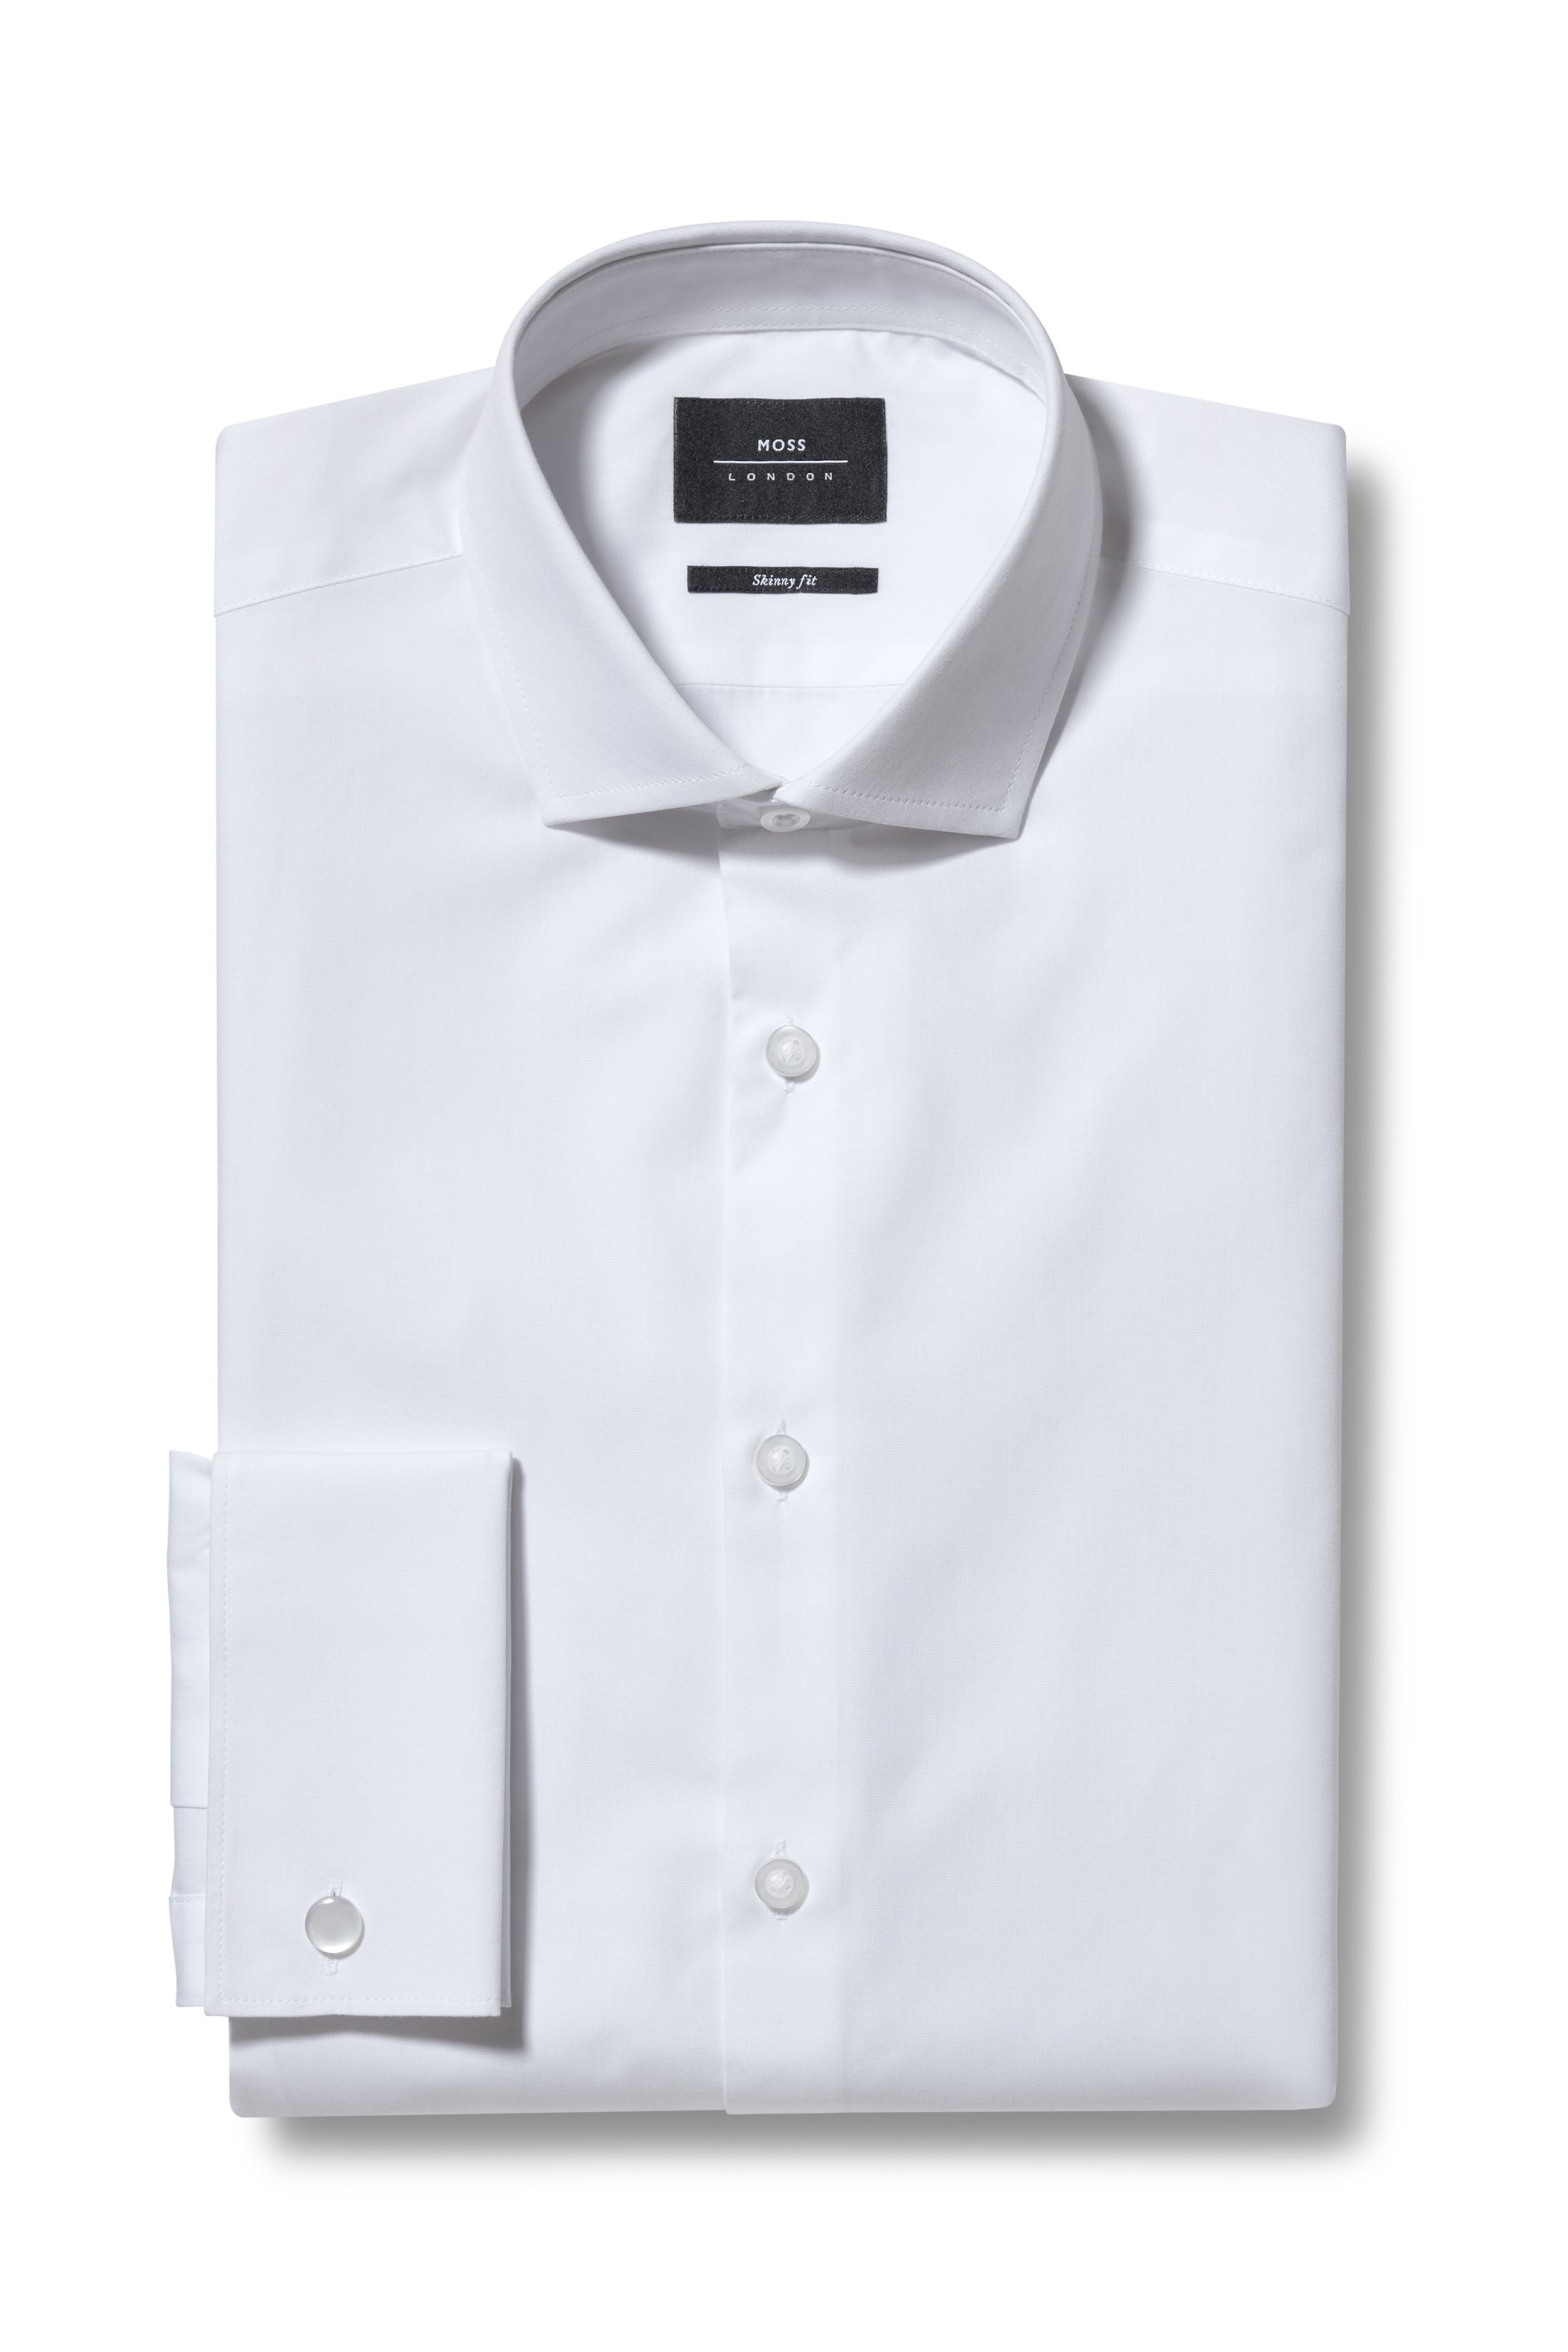 Slim Fit White Double Cuff Shirt | Buy Online at Moss